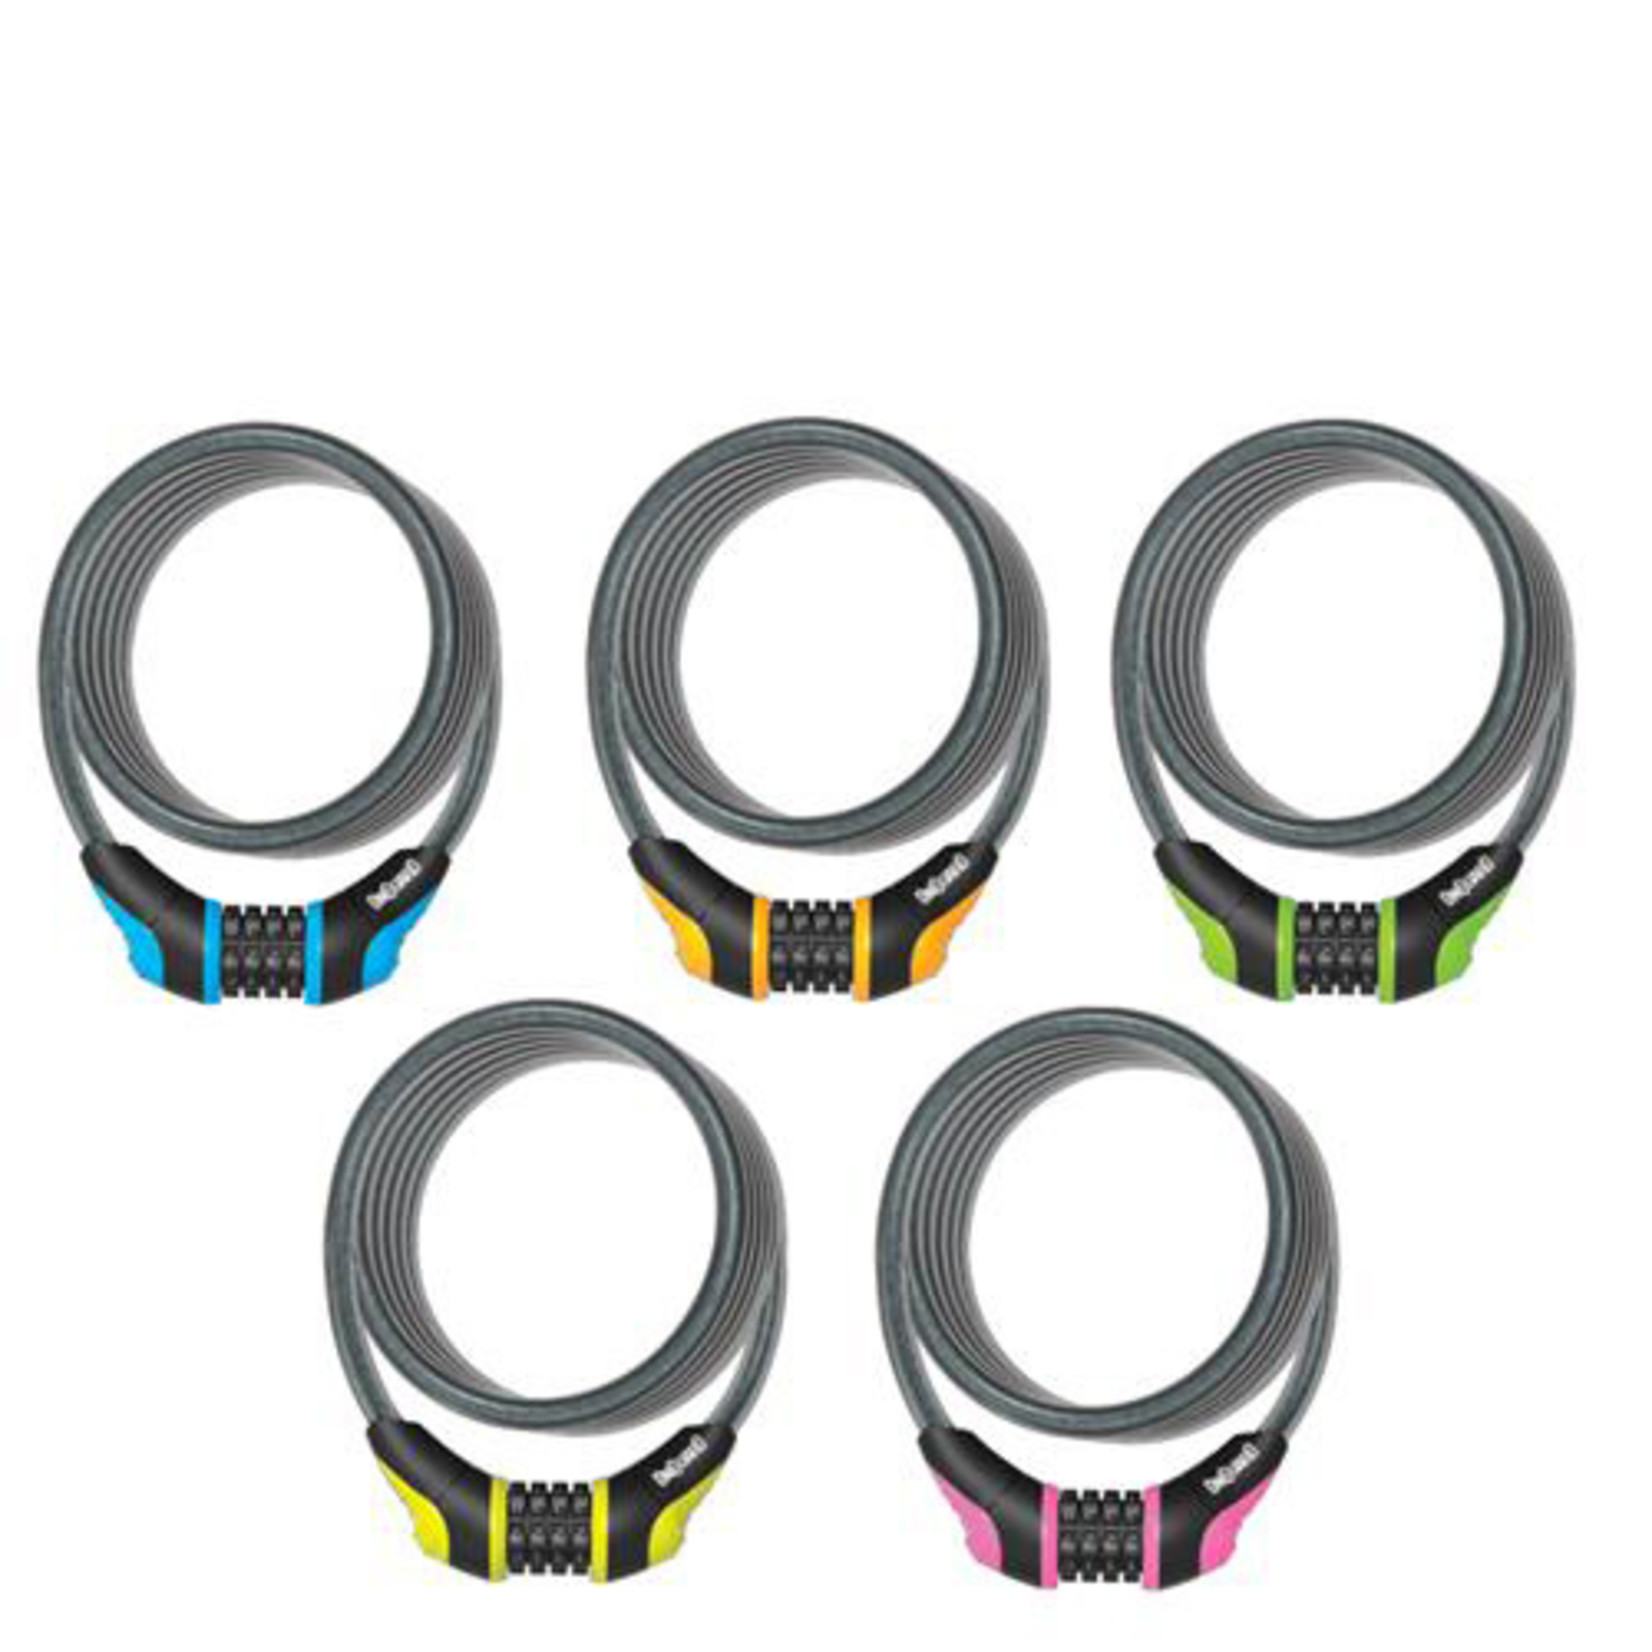 Onguard Onguard Bike Lock - Neon Series - Coiled Cable Combination Lock - 120cm x 8mm